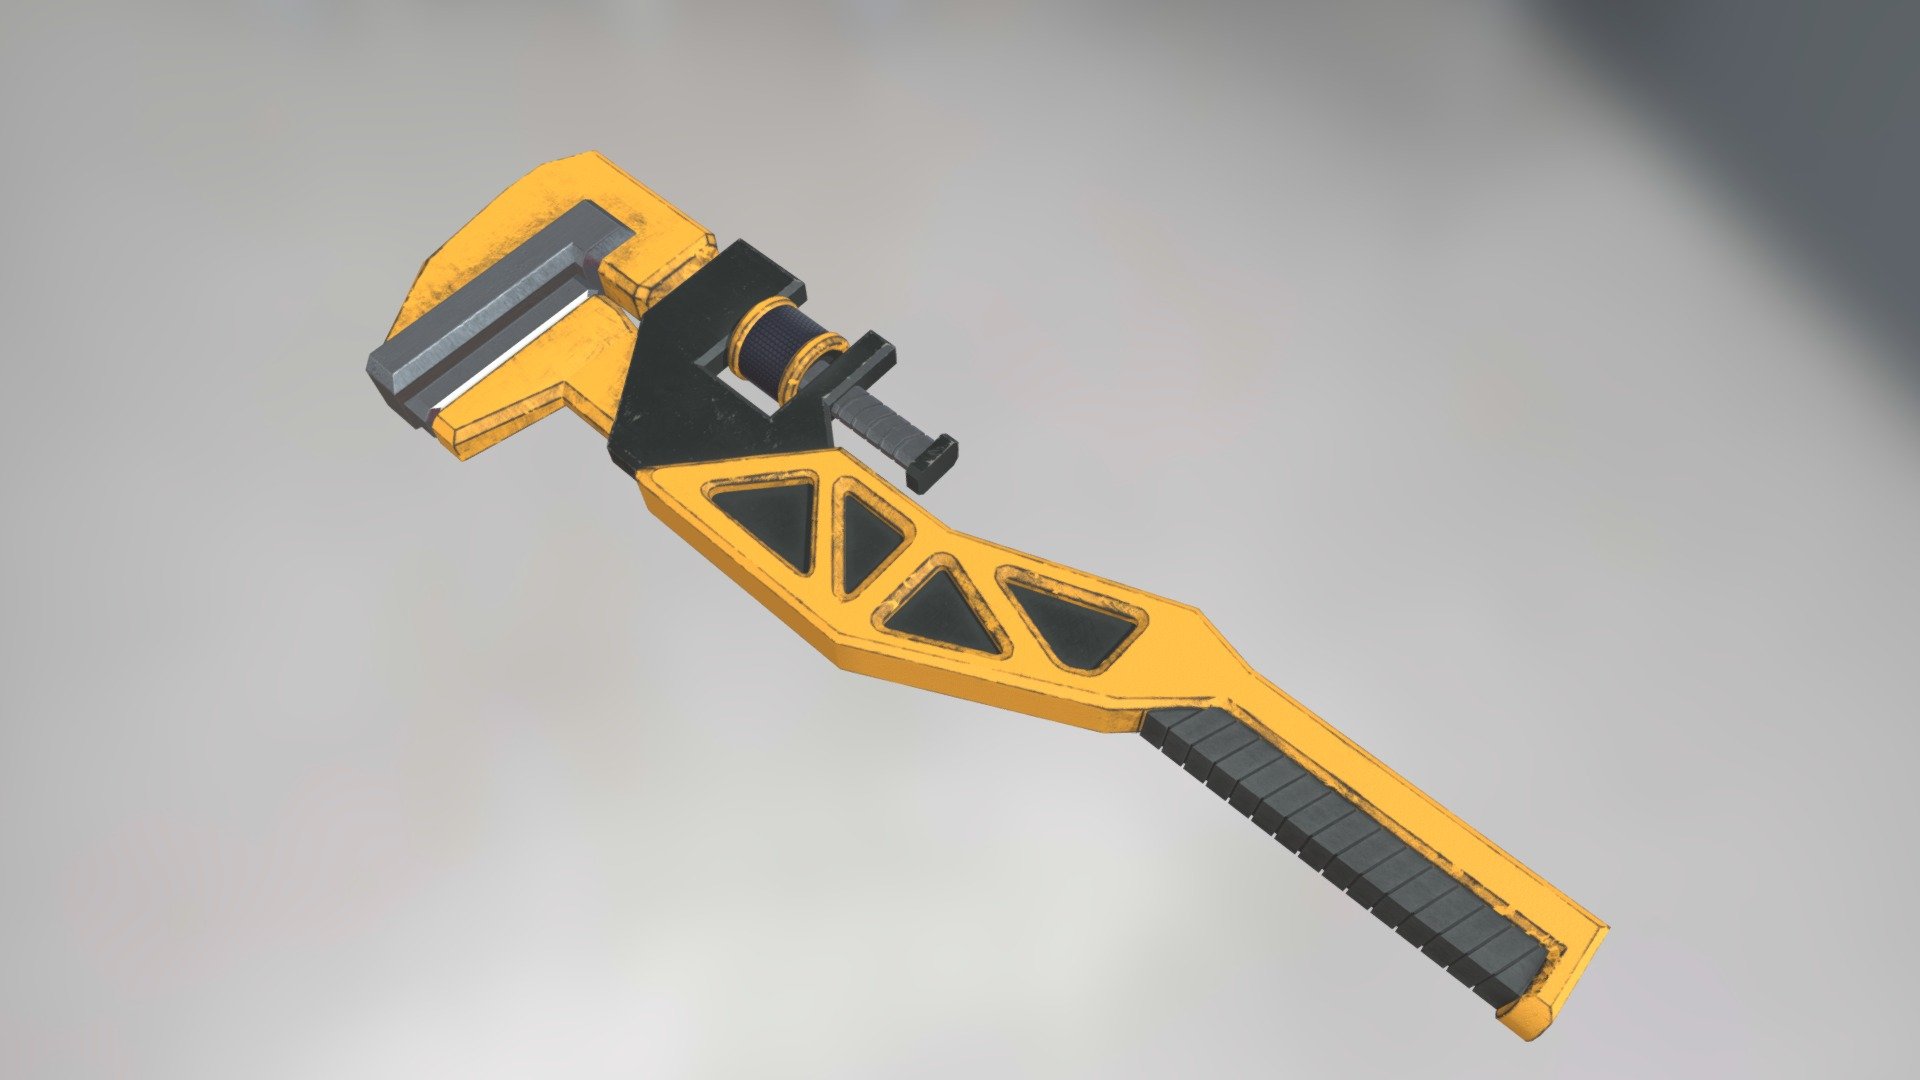 Futuristic approach of a industrial wrench design.
Scifi Worn Industrial Wrench Tool, Garage Equipment, Screw, Mechanic, Gear, melee Weapon, low poly game Asset
Modelled With Blender,
Textured Using Substance painter 3d model